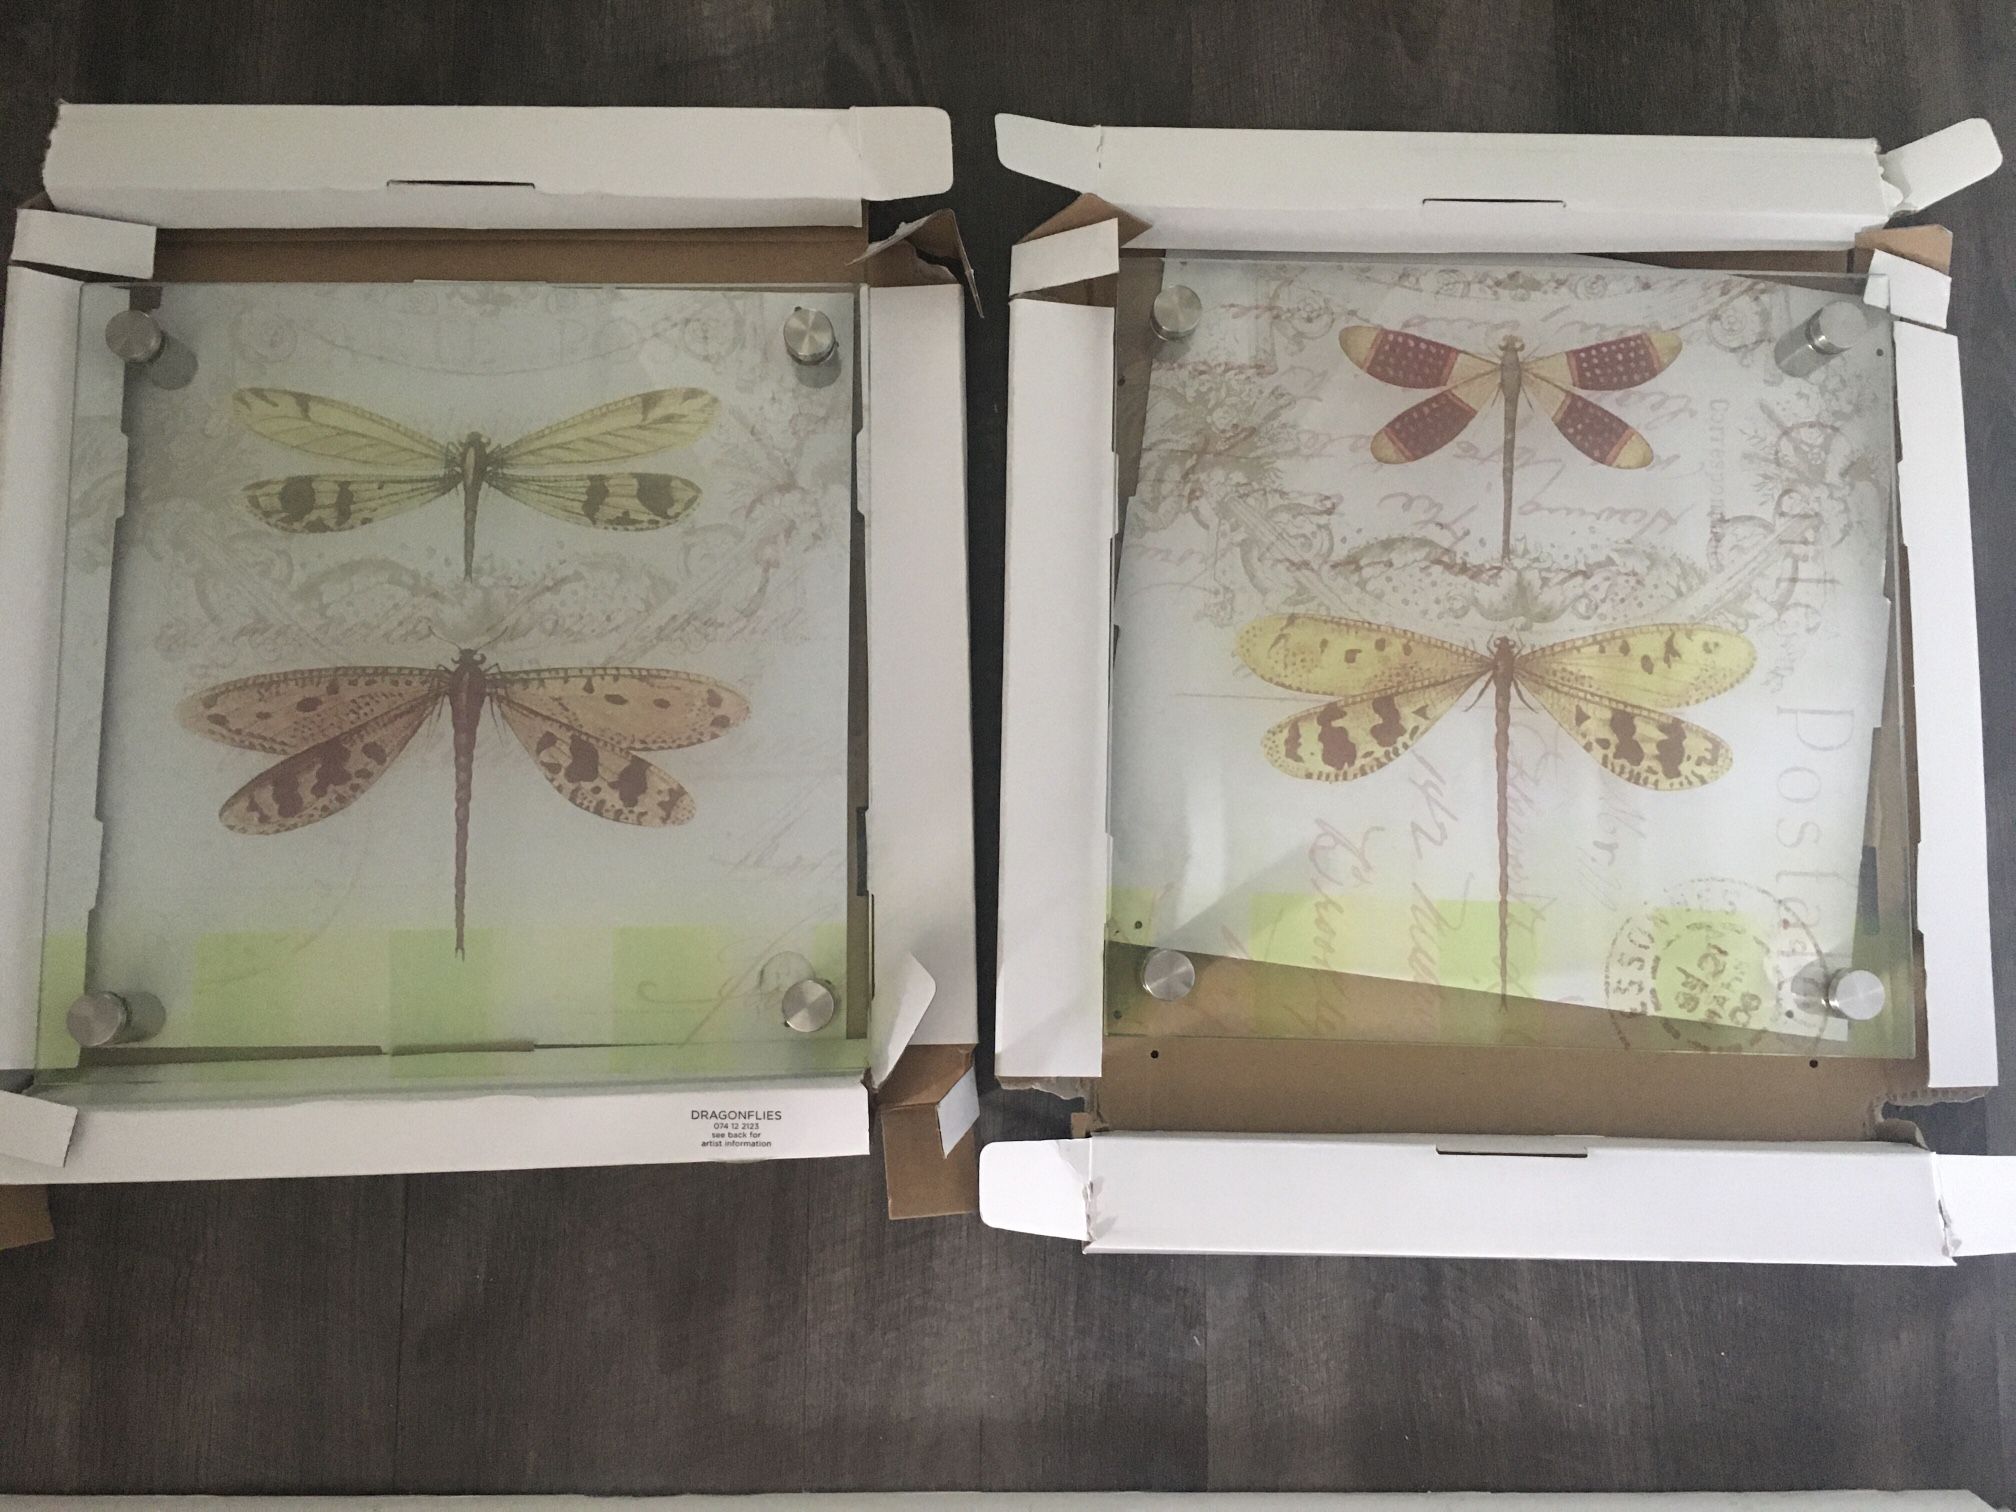 Dragonfly Wall Art - 2 pieces